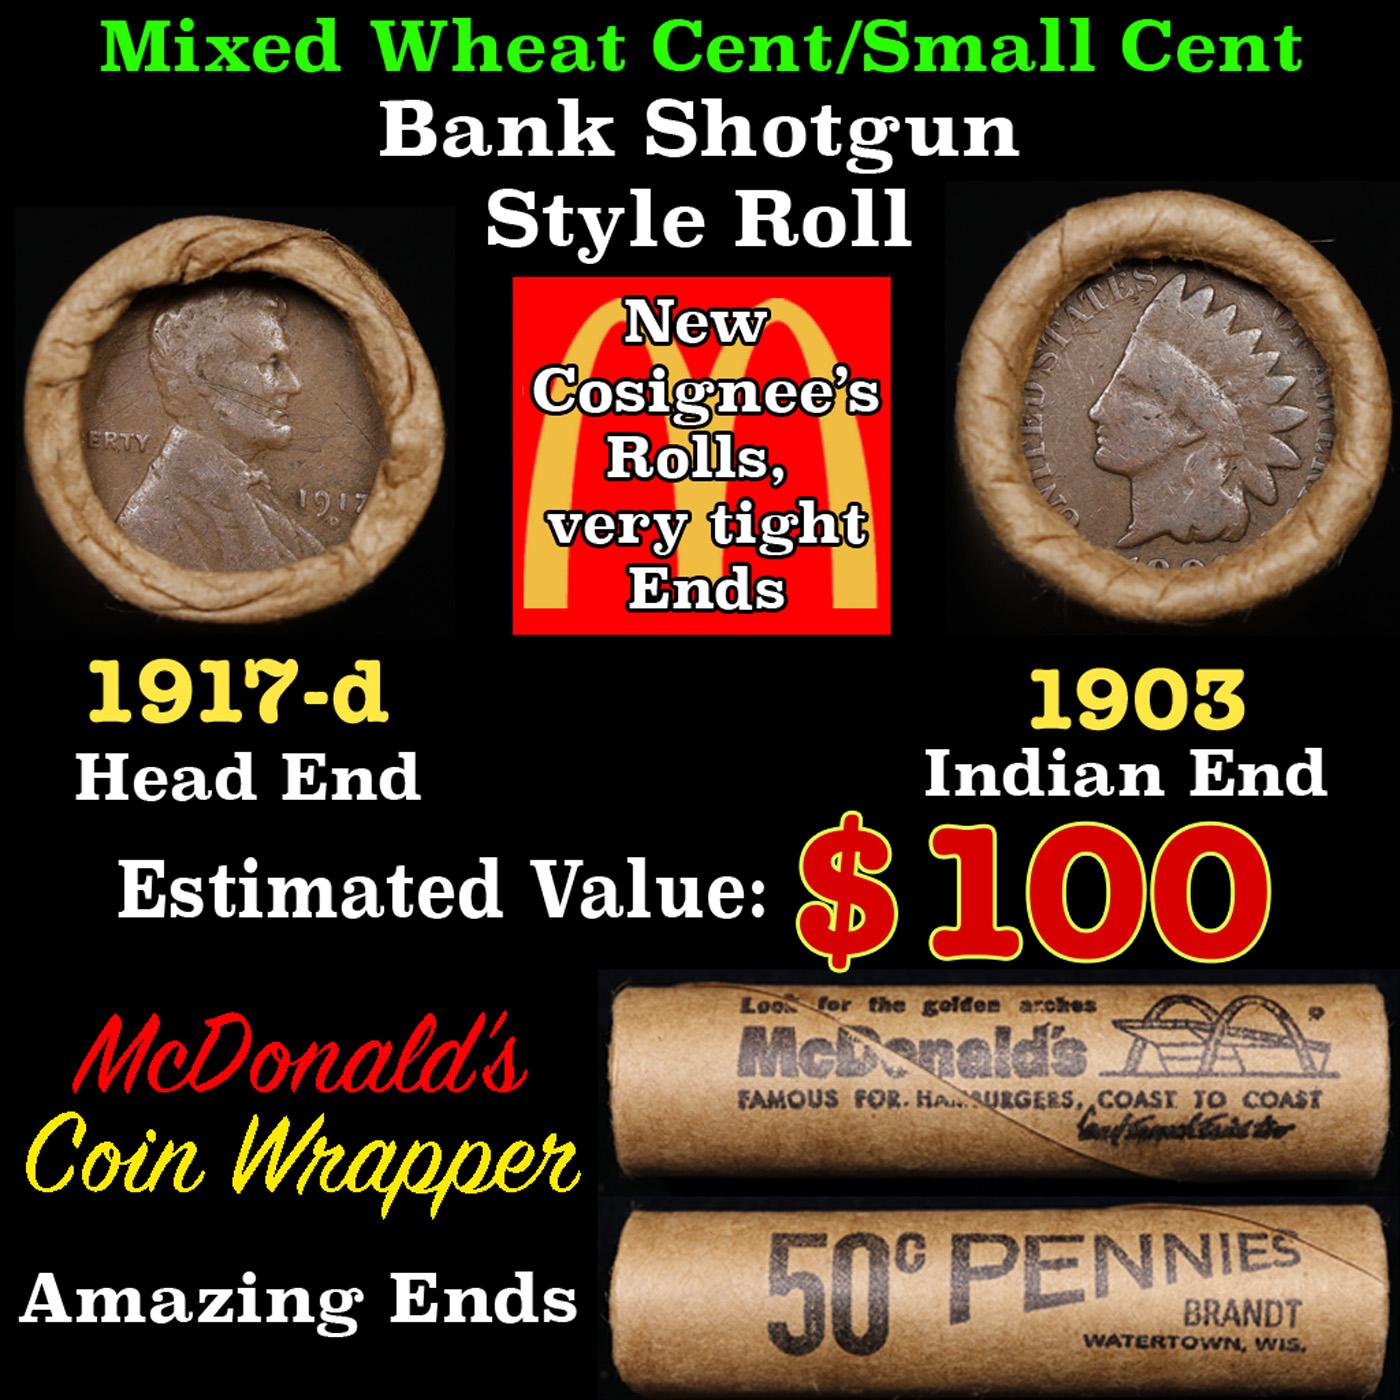 Lincoln Wheat Cent 1c Mixed Roll Orig Brandt McDonalds Wrapper, 1917-d end, 1903 Indian other end